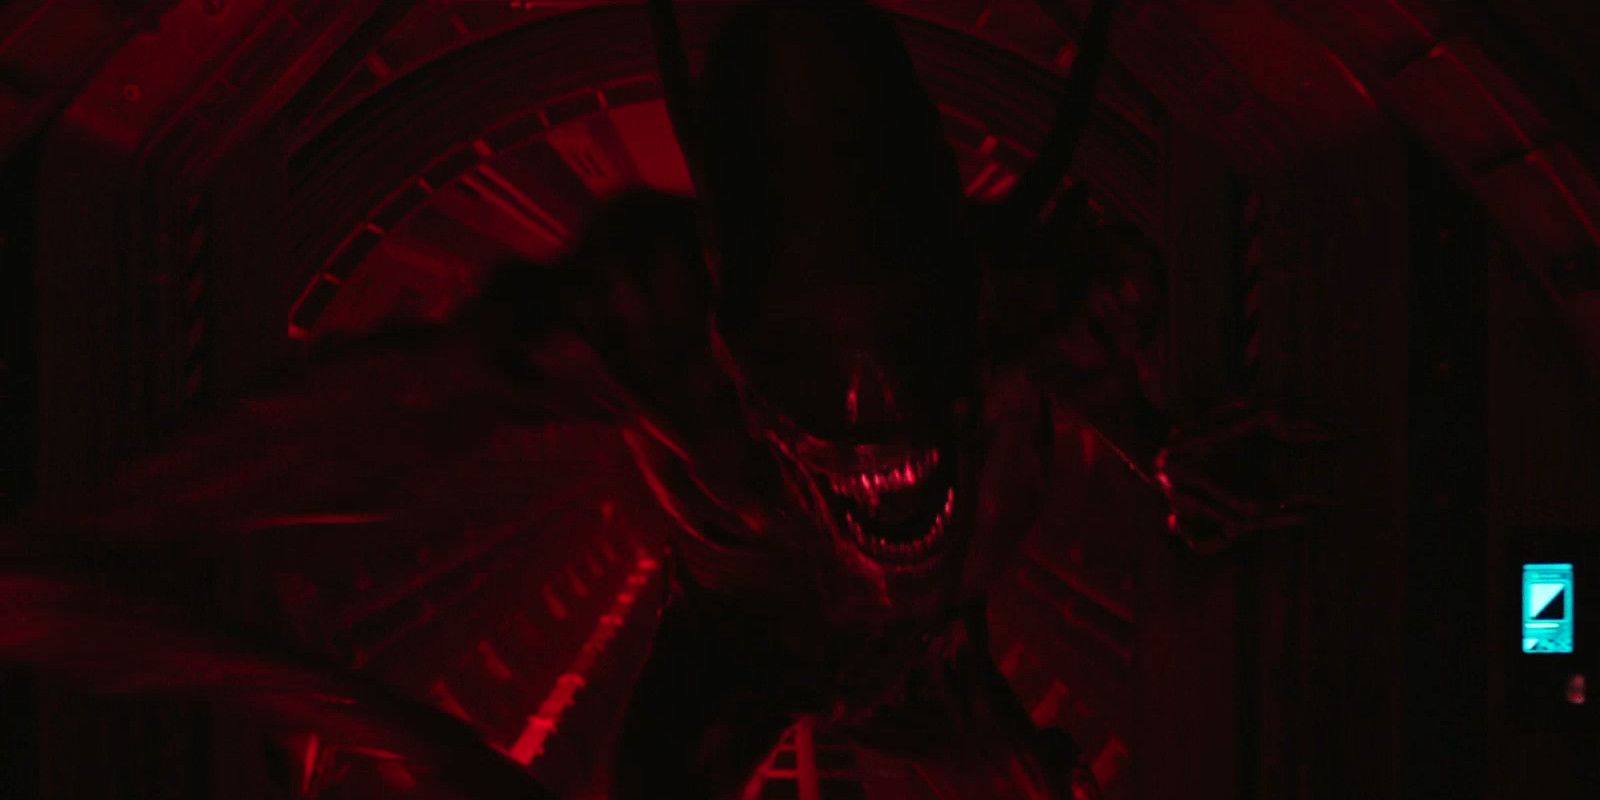 Alien Covenant Needs To Be More Than an Alien Retread